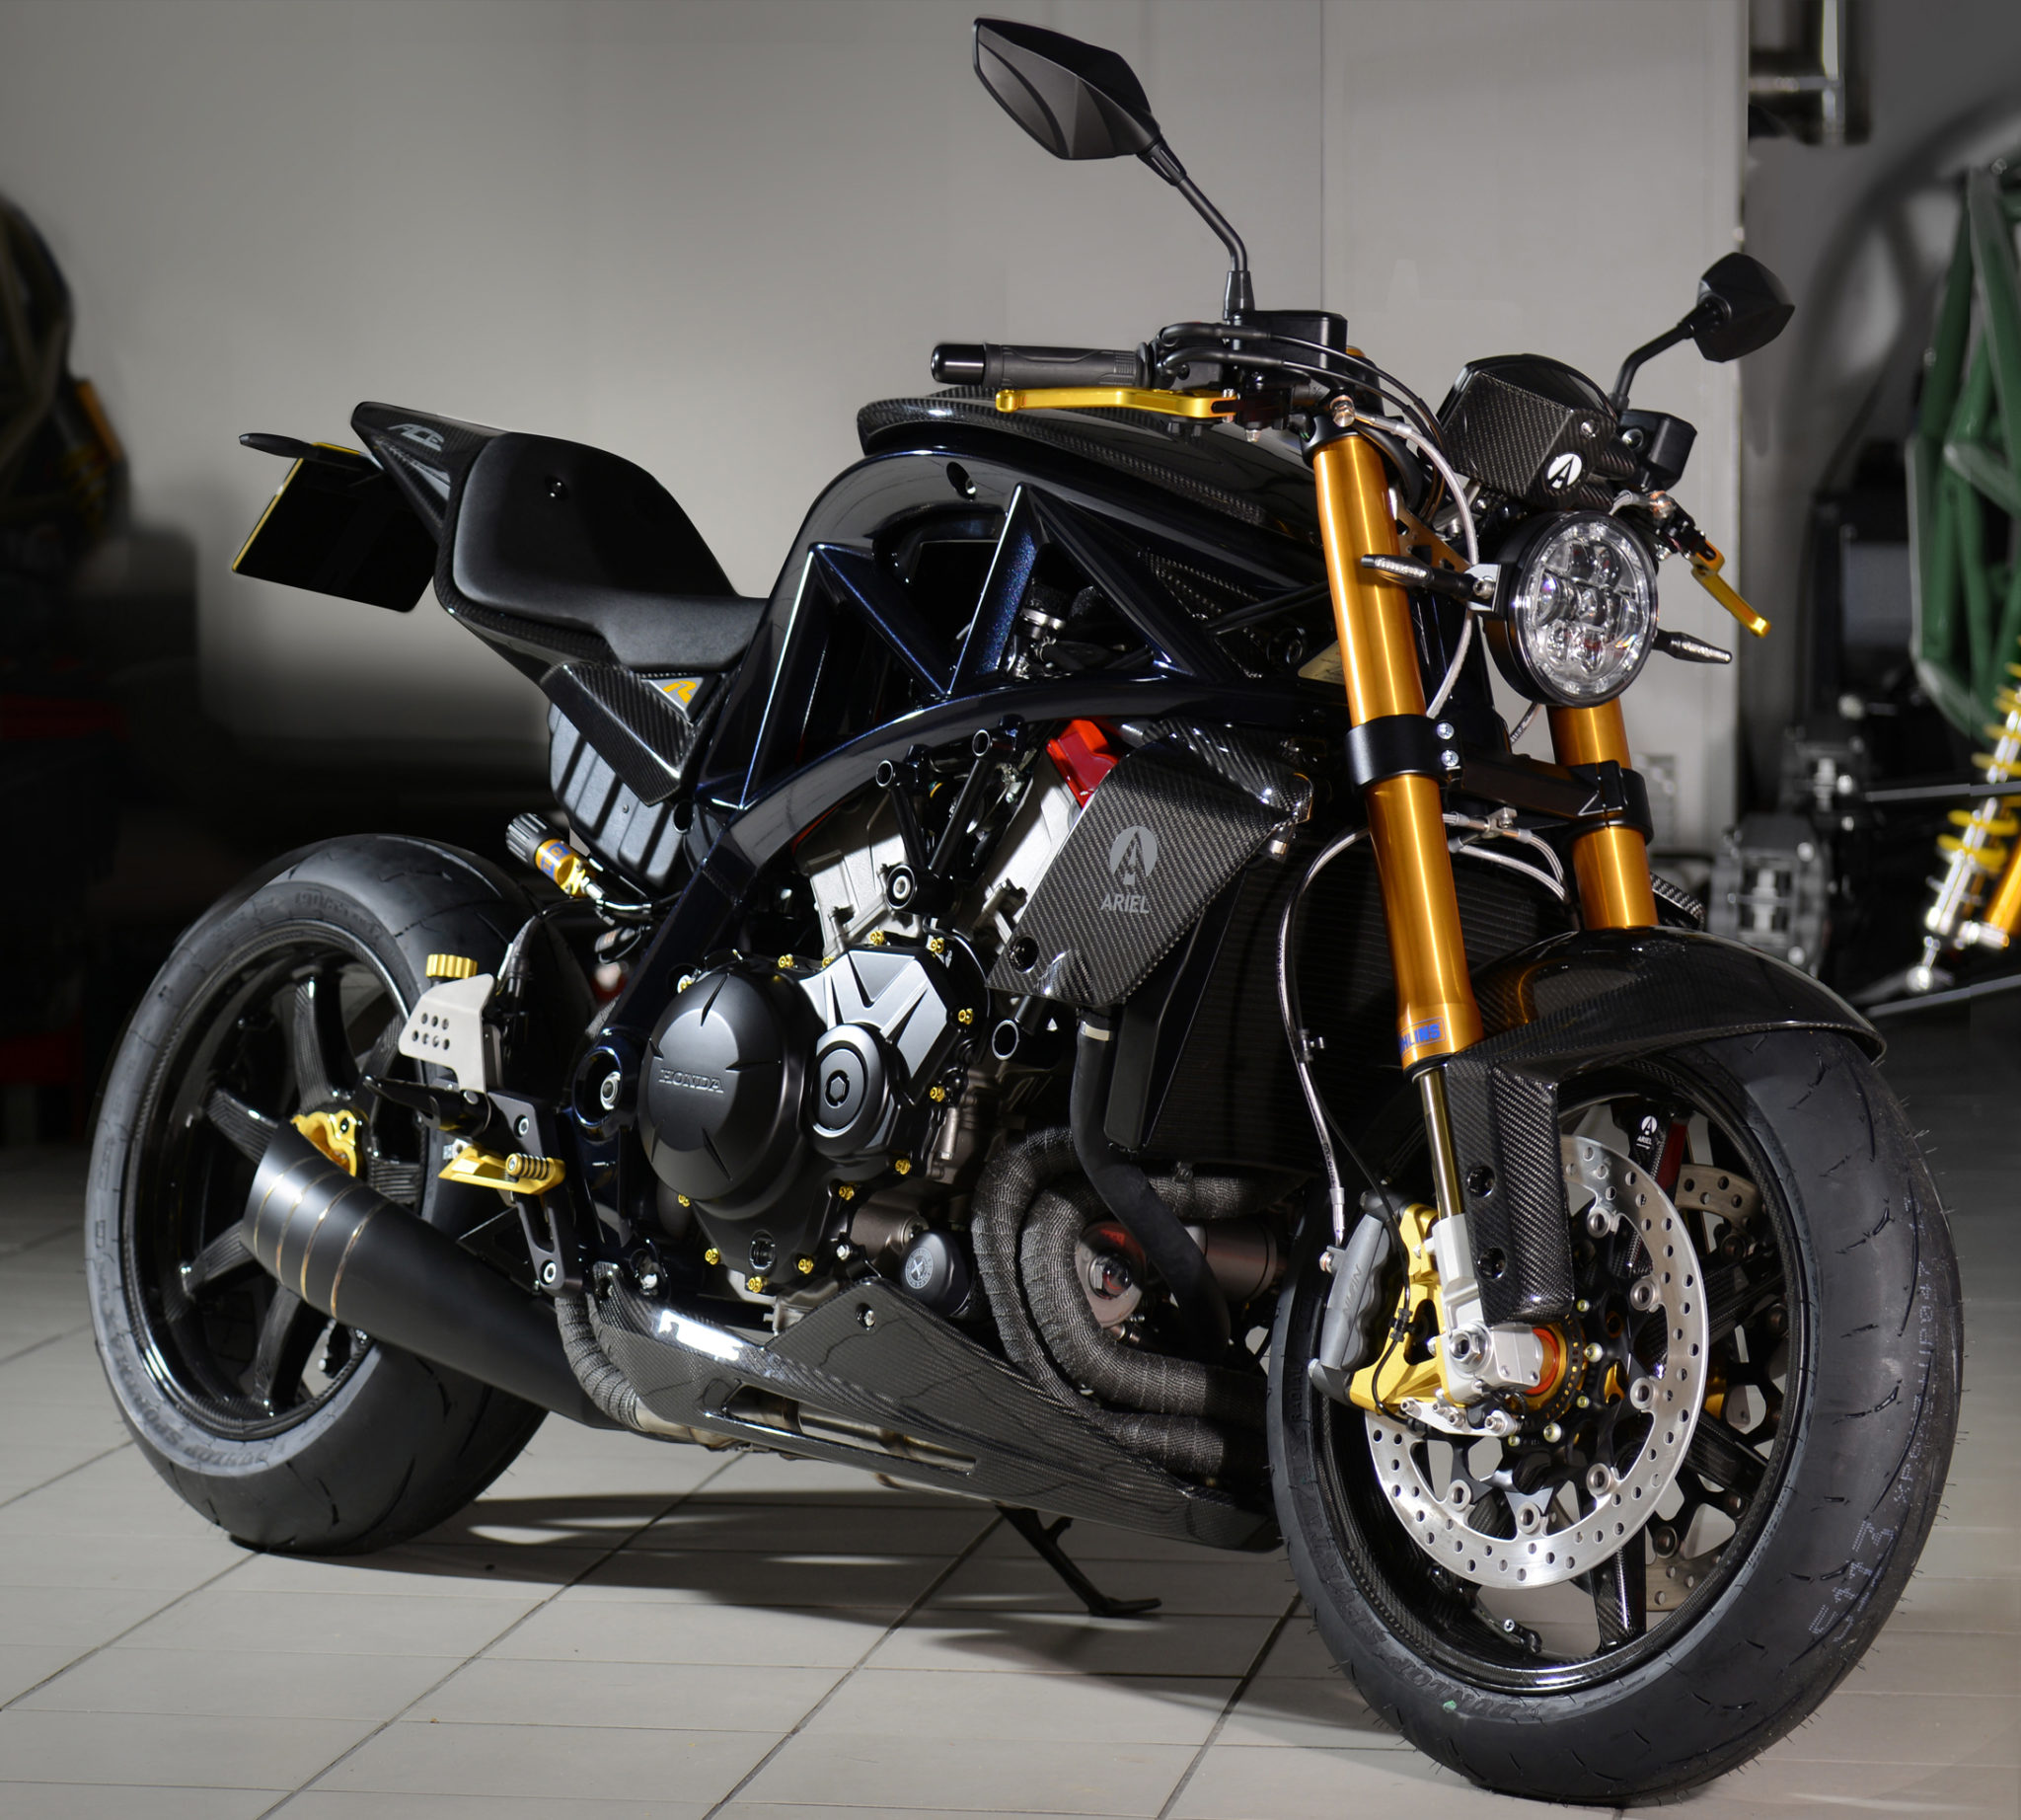 With carbon bodywork, black pearl frame and gold anodizing, the Ariel Ace R is a Limited Edition of which only 10 units will be made and sold worldwide.